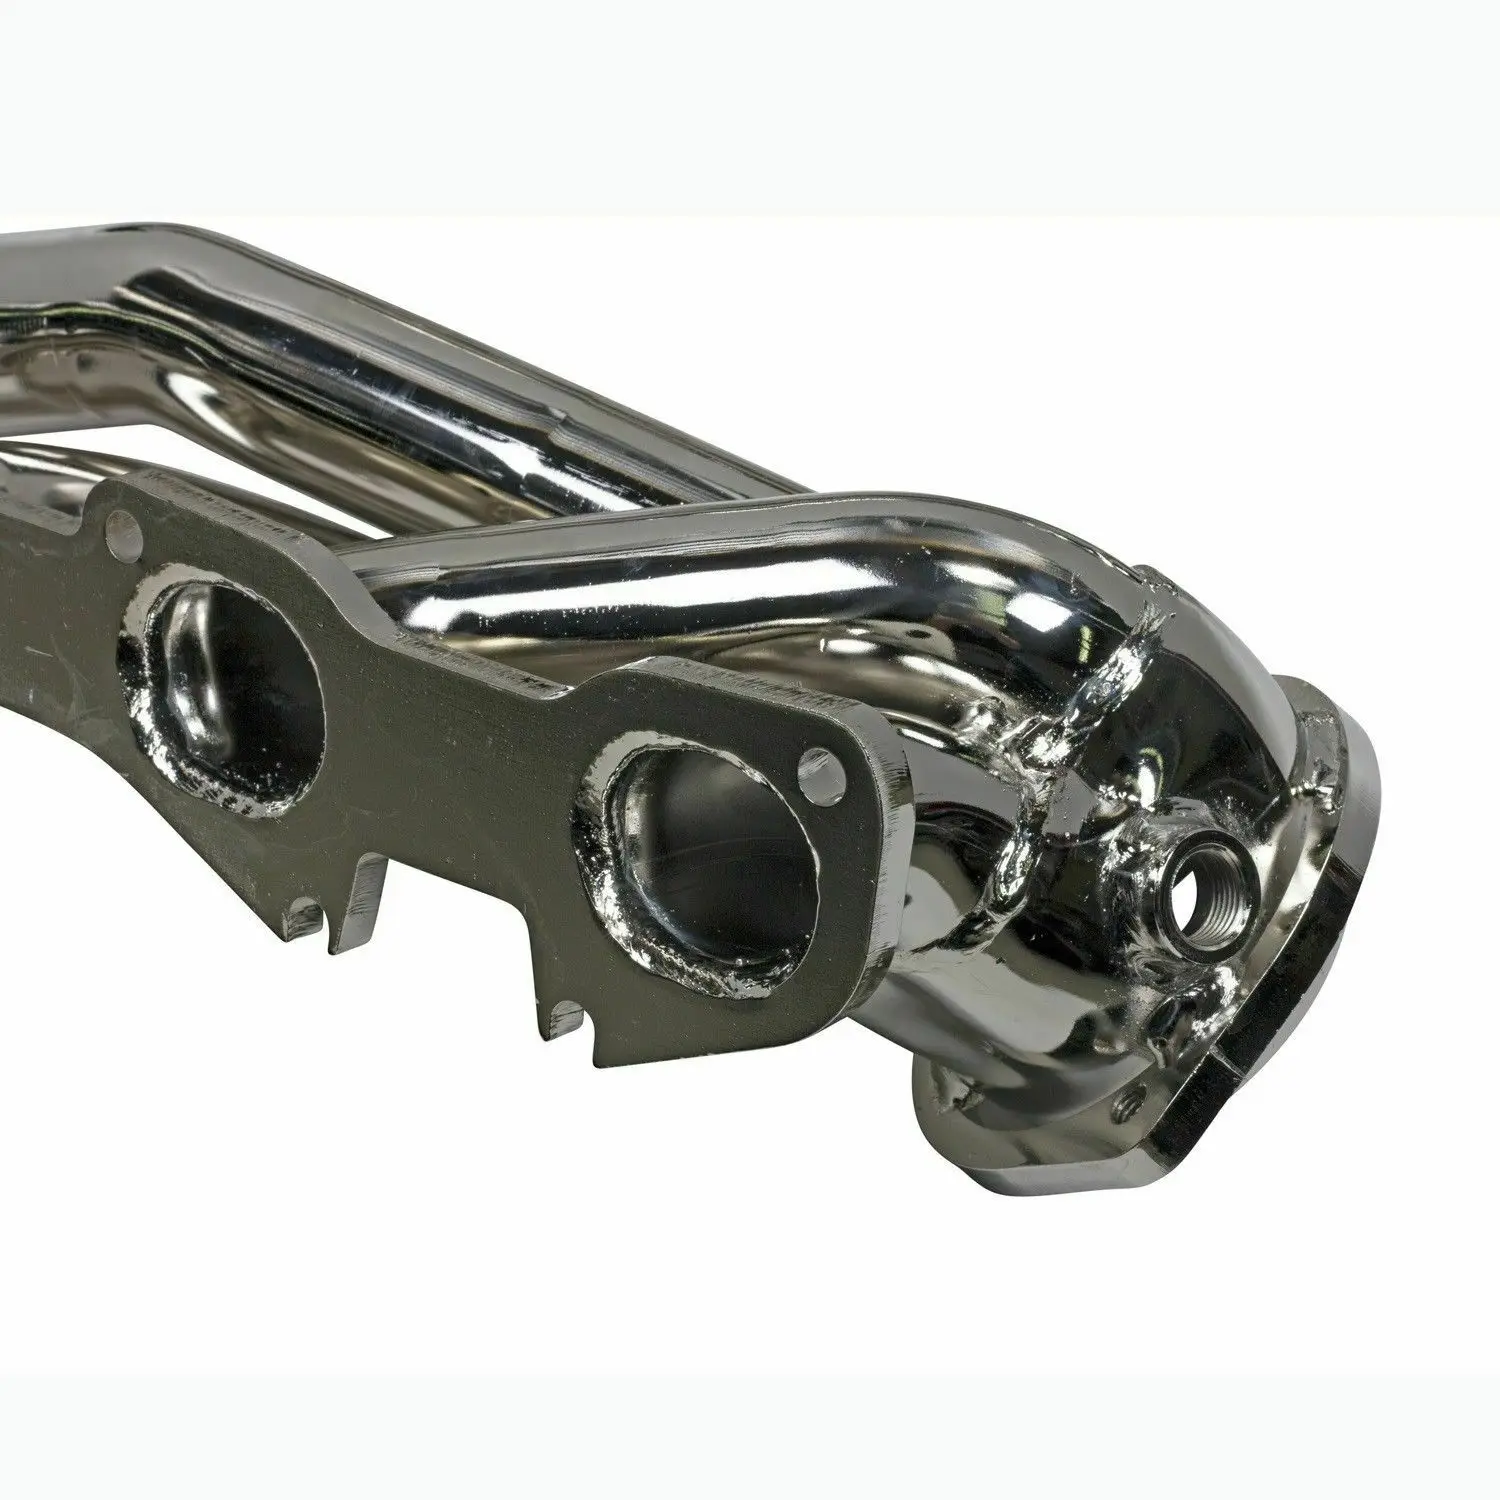 High Quality For 09-18 Dodge Ram 1500 Headers Exhaust Shorty Hemi Manifold Stainless 5.7L